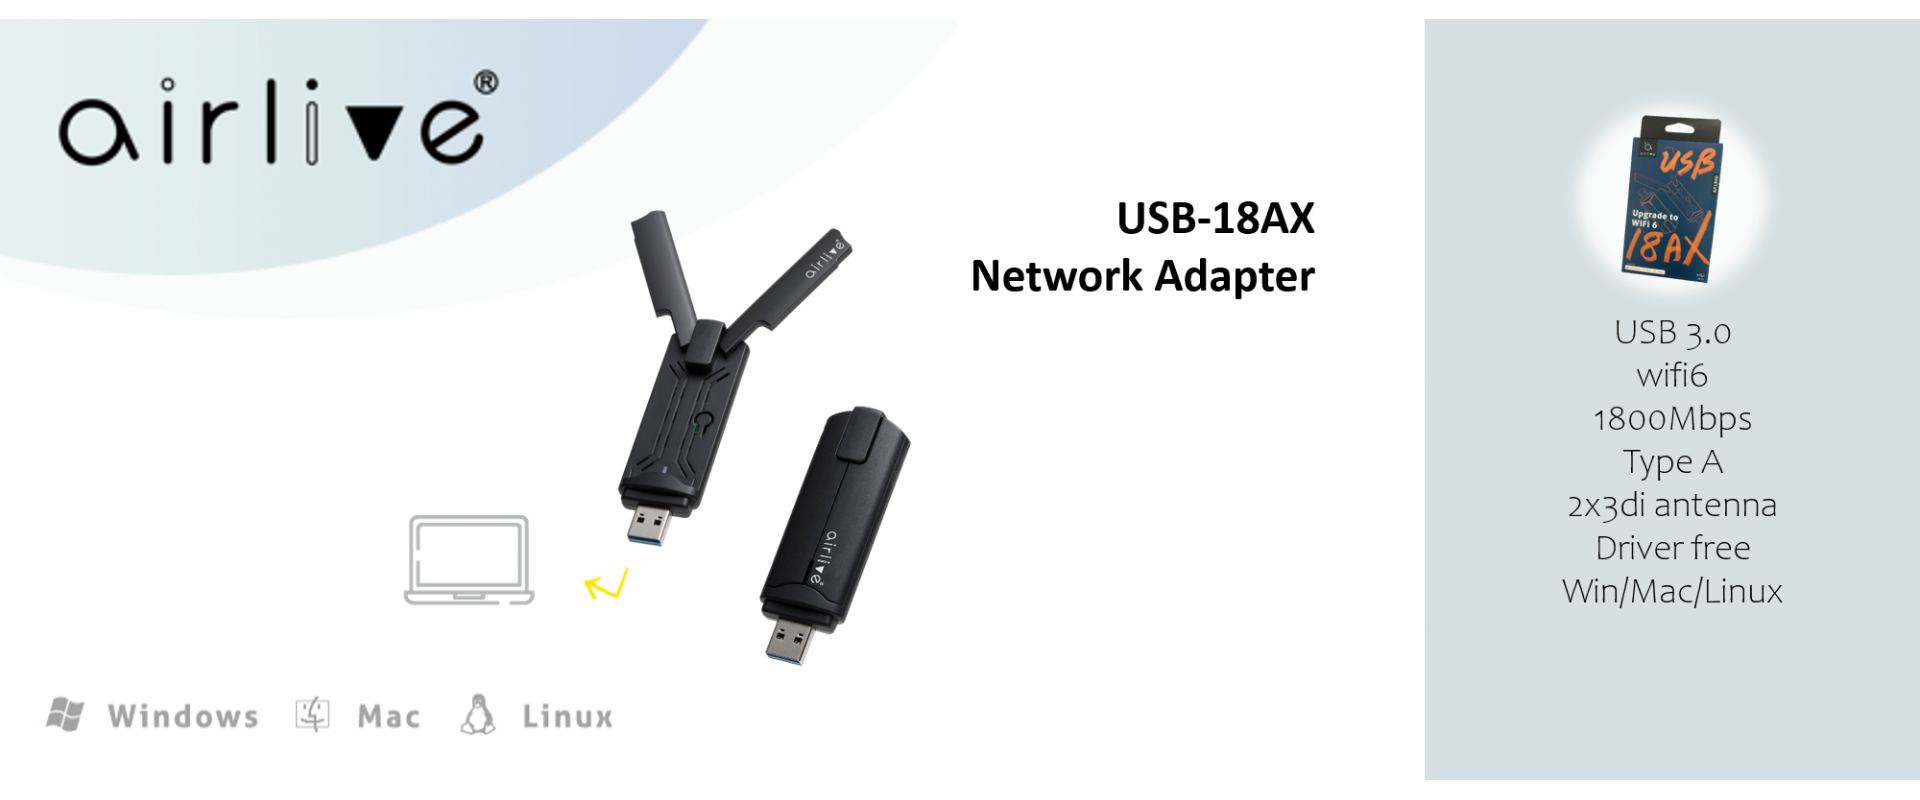 AirLive Banner - USB-18AX